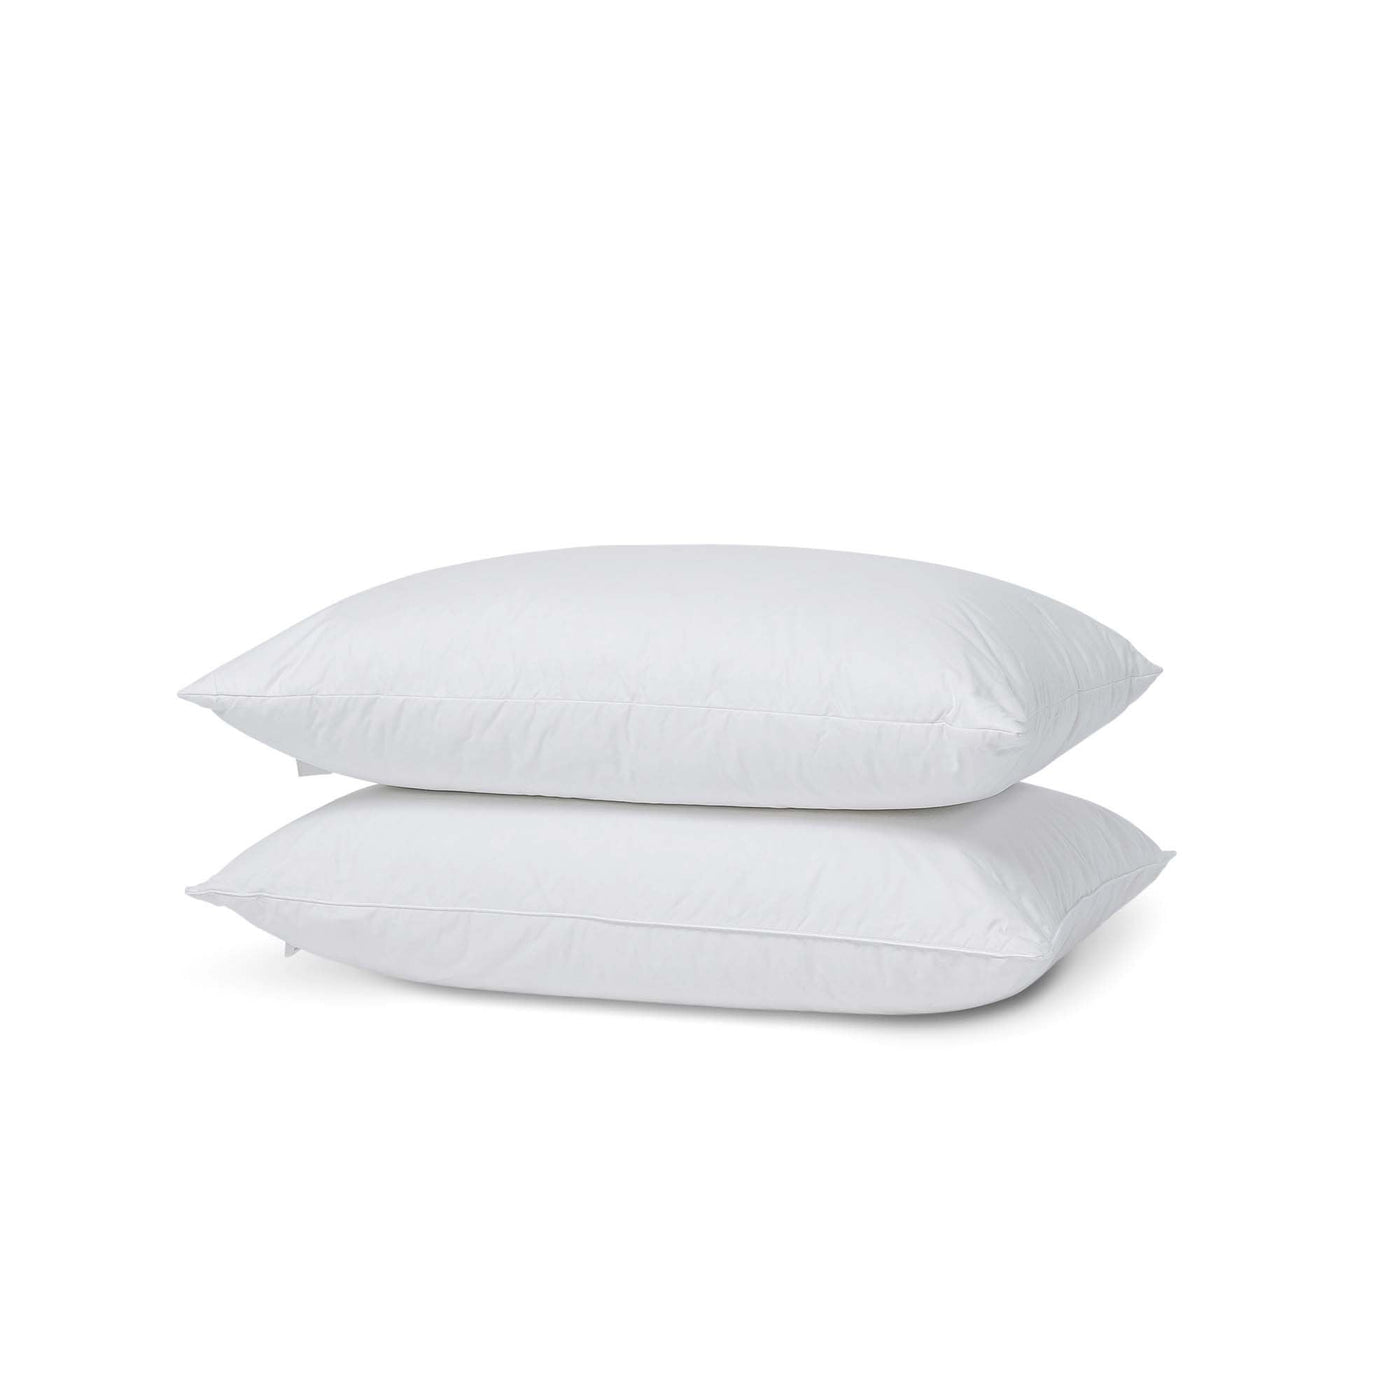 Morzine Goose Feather and Down Pillows